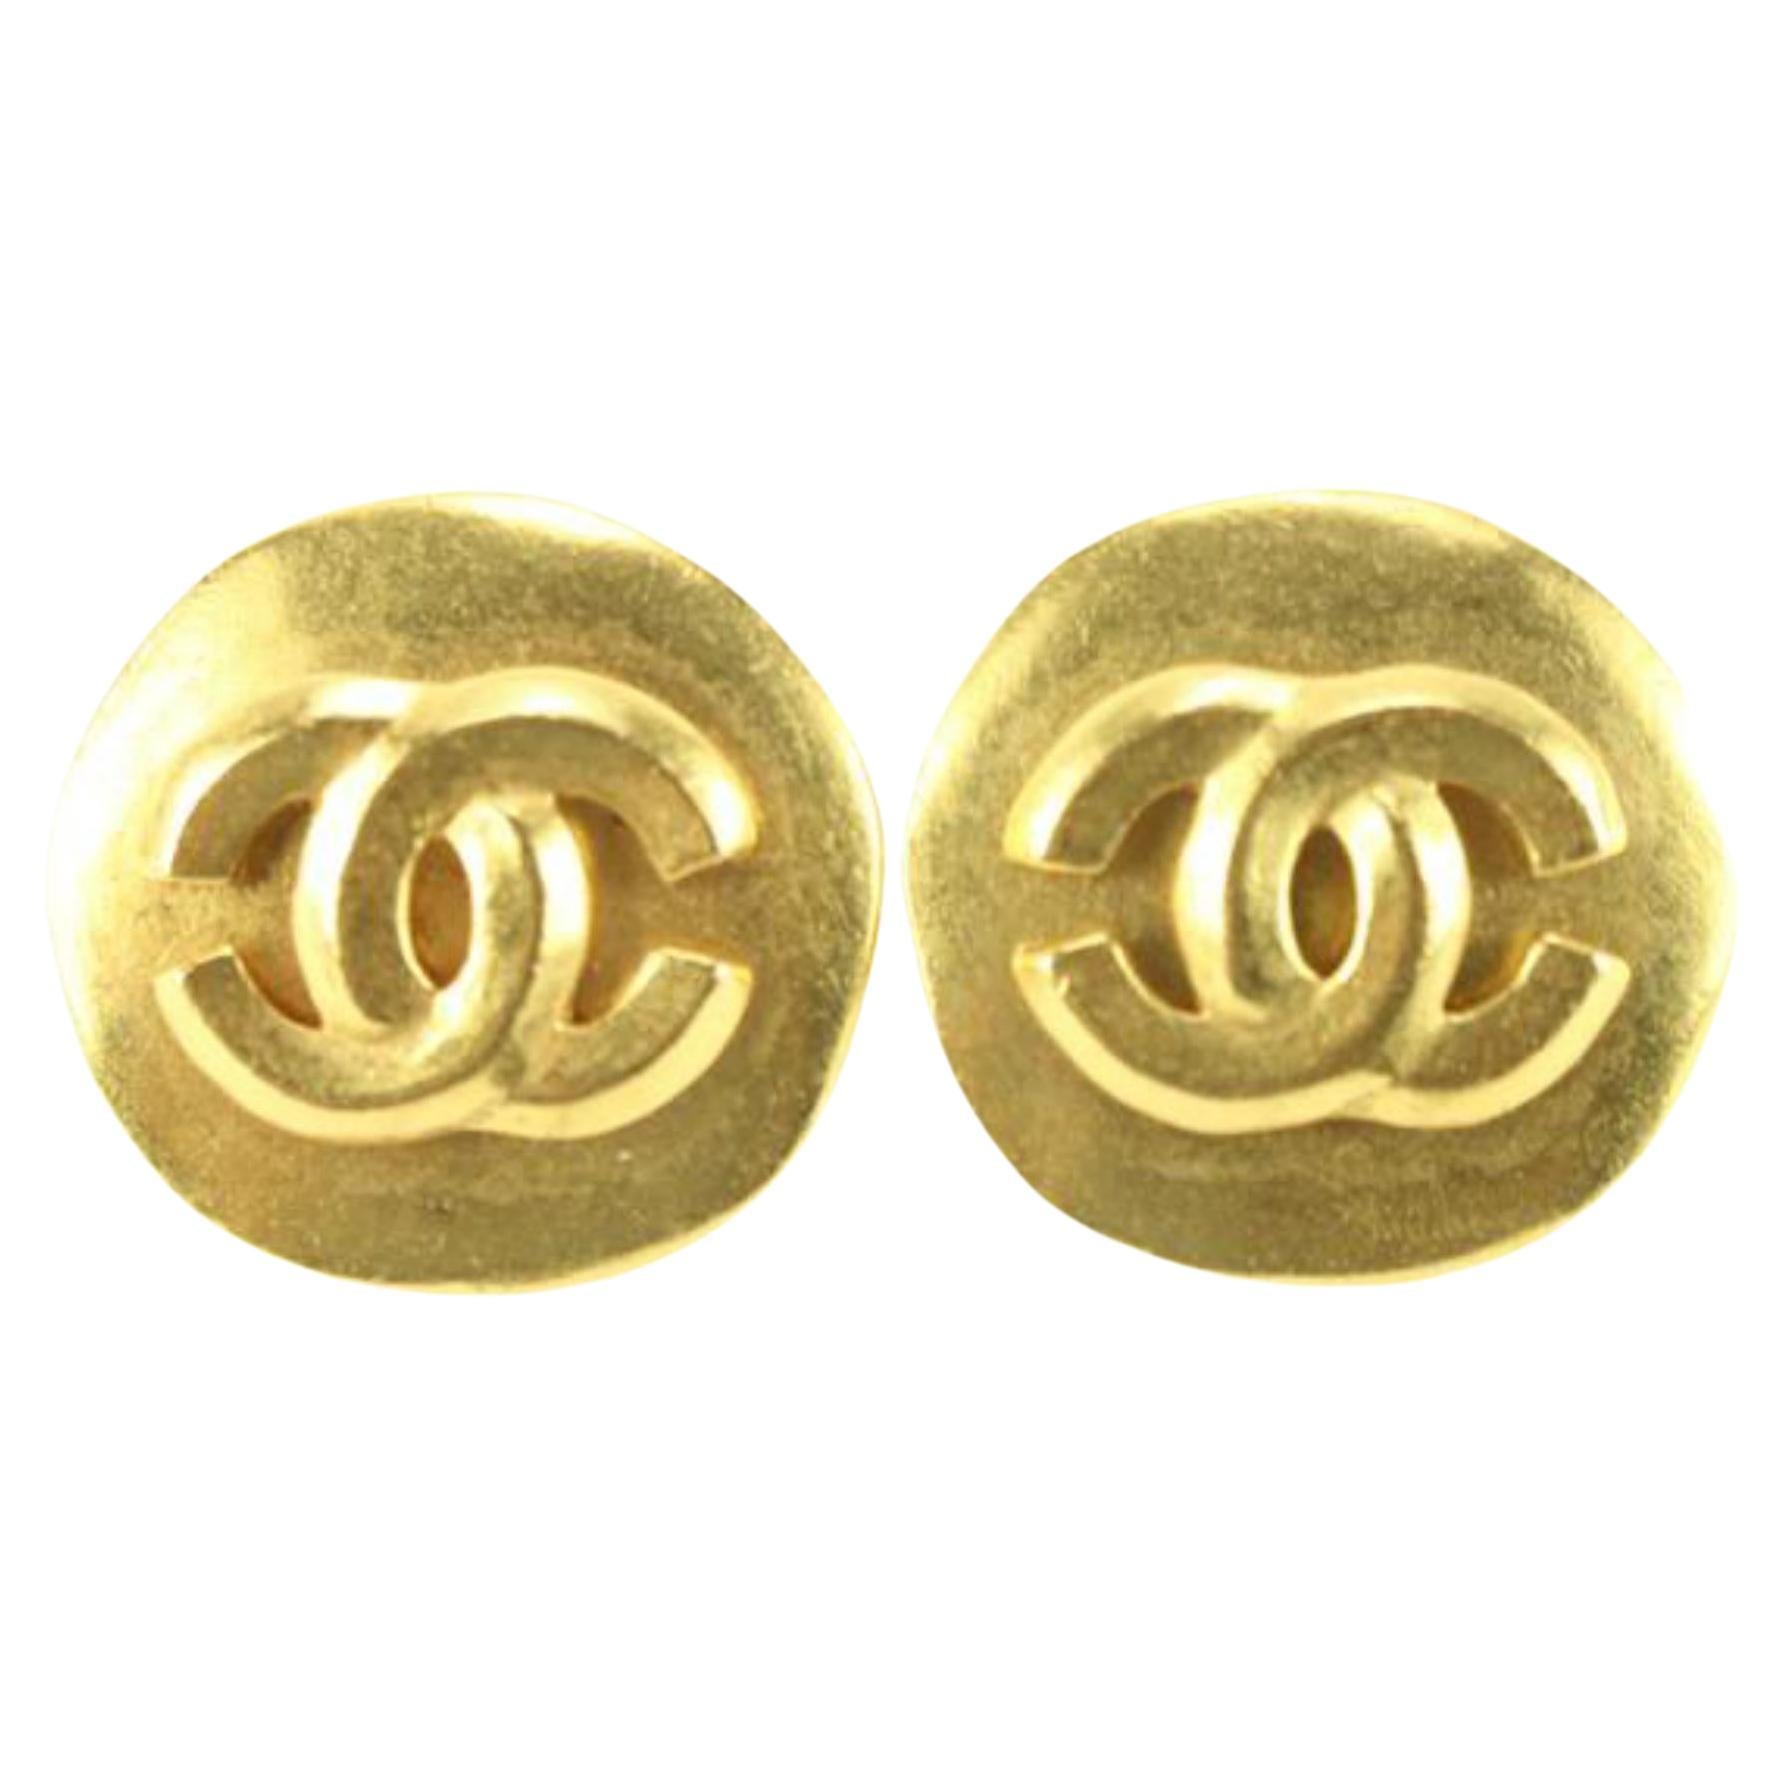 Chanel 95A 24K Gold Plated CC Logo Square Diamond Earrings 71ck726s